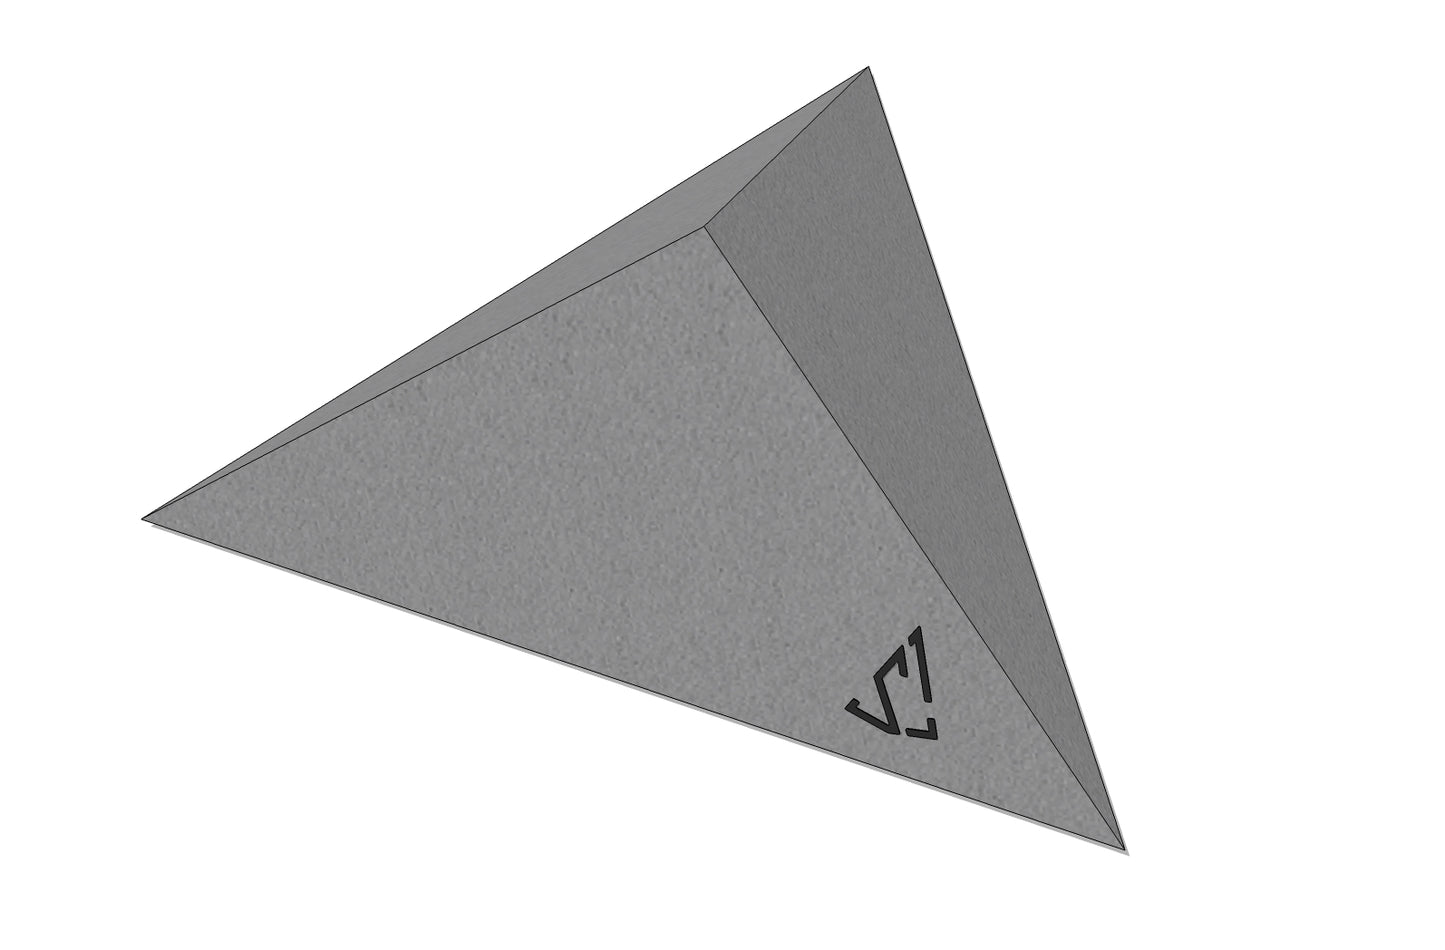 Equilateral Triangle High